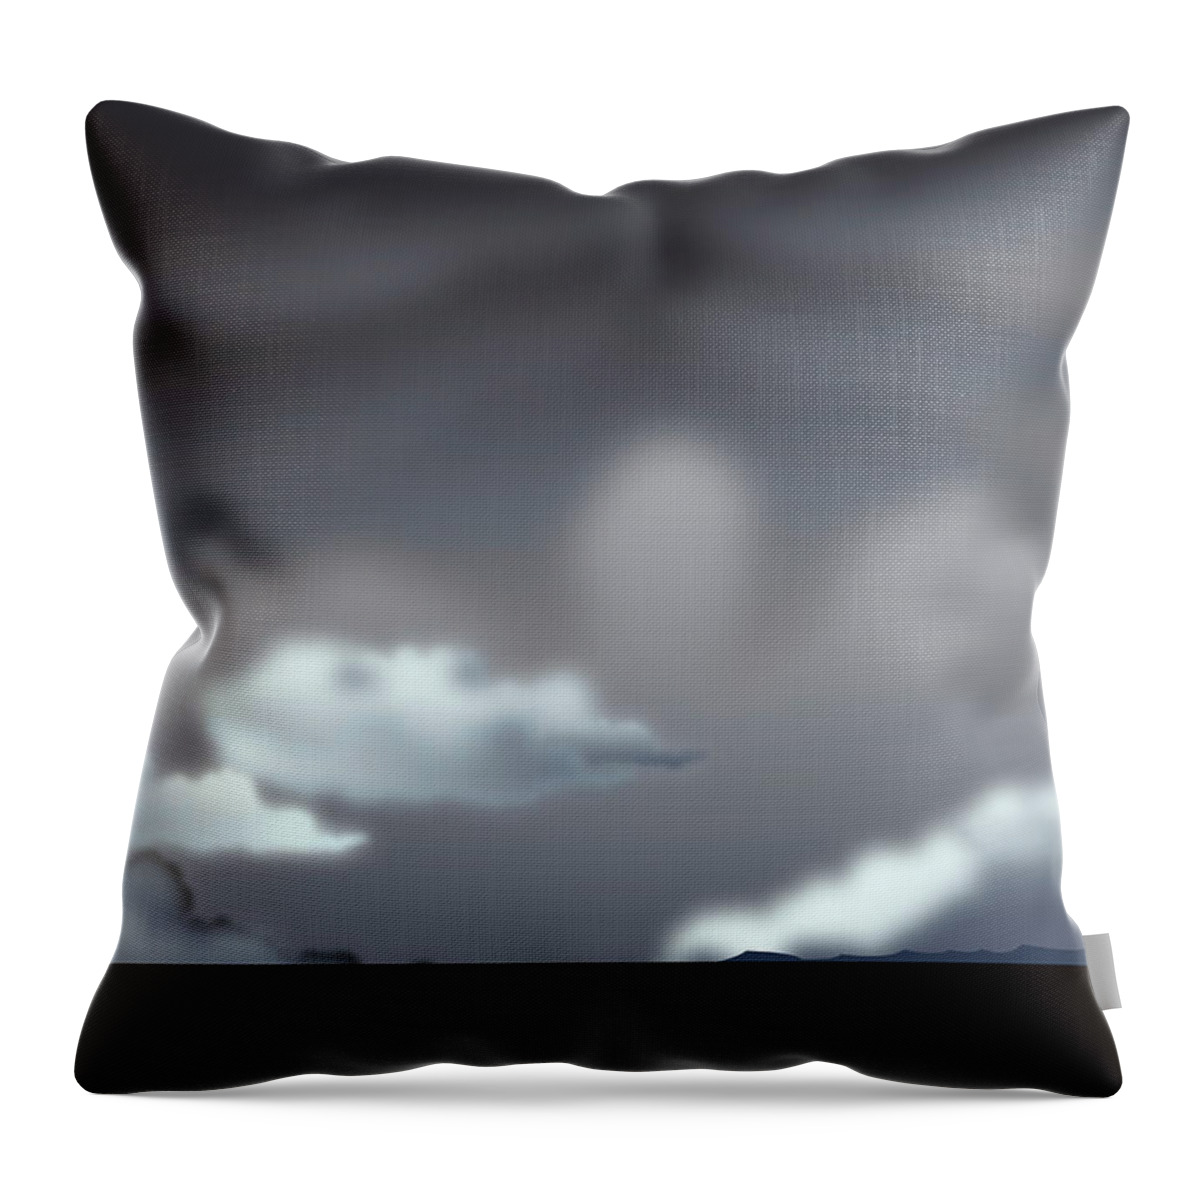 Chinese Culture Throw Pillow featuring the digital art China Scenics by Best View Stock